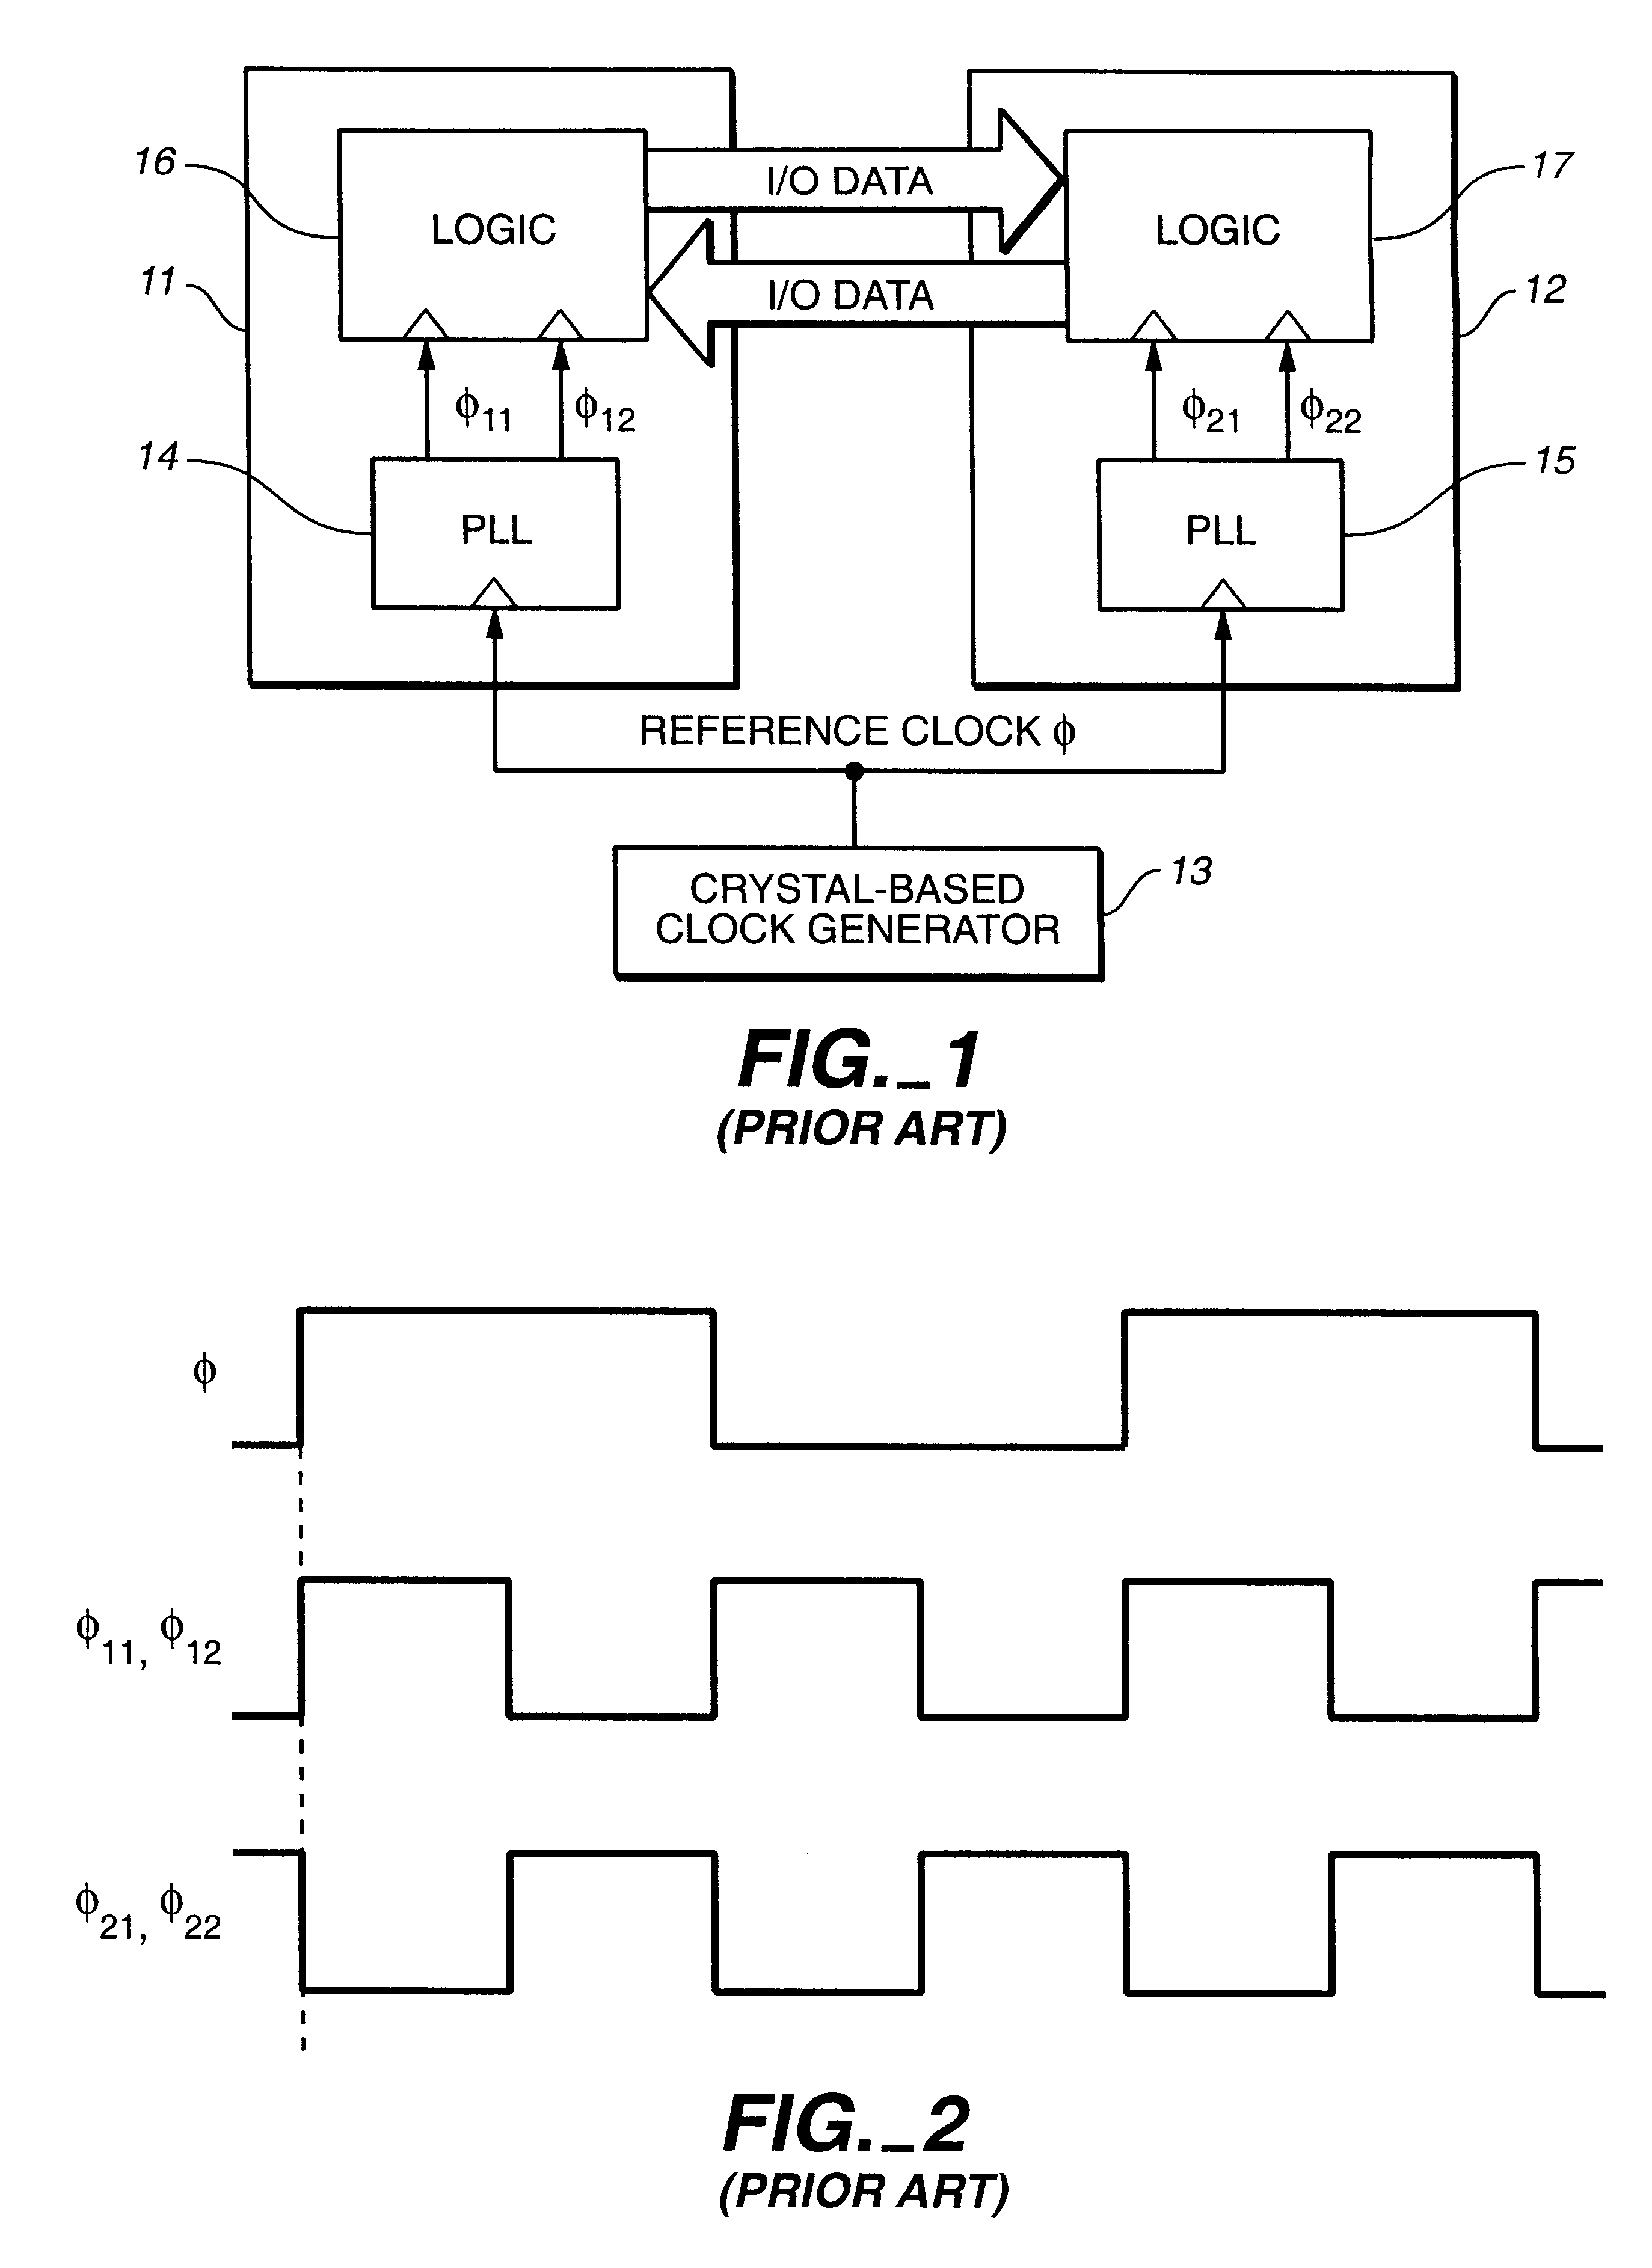 Apparatus for and method of detecting a delay fault